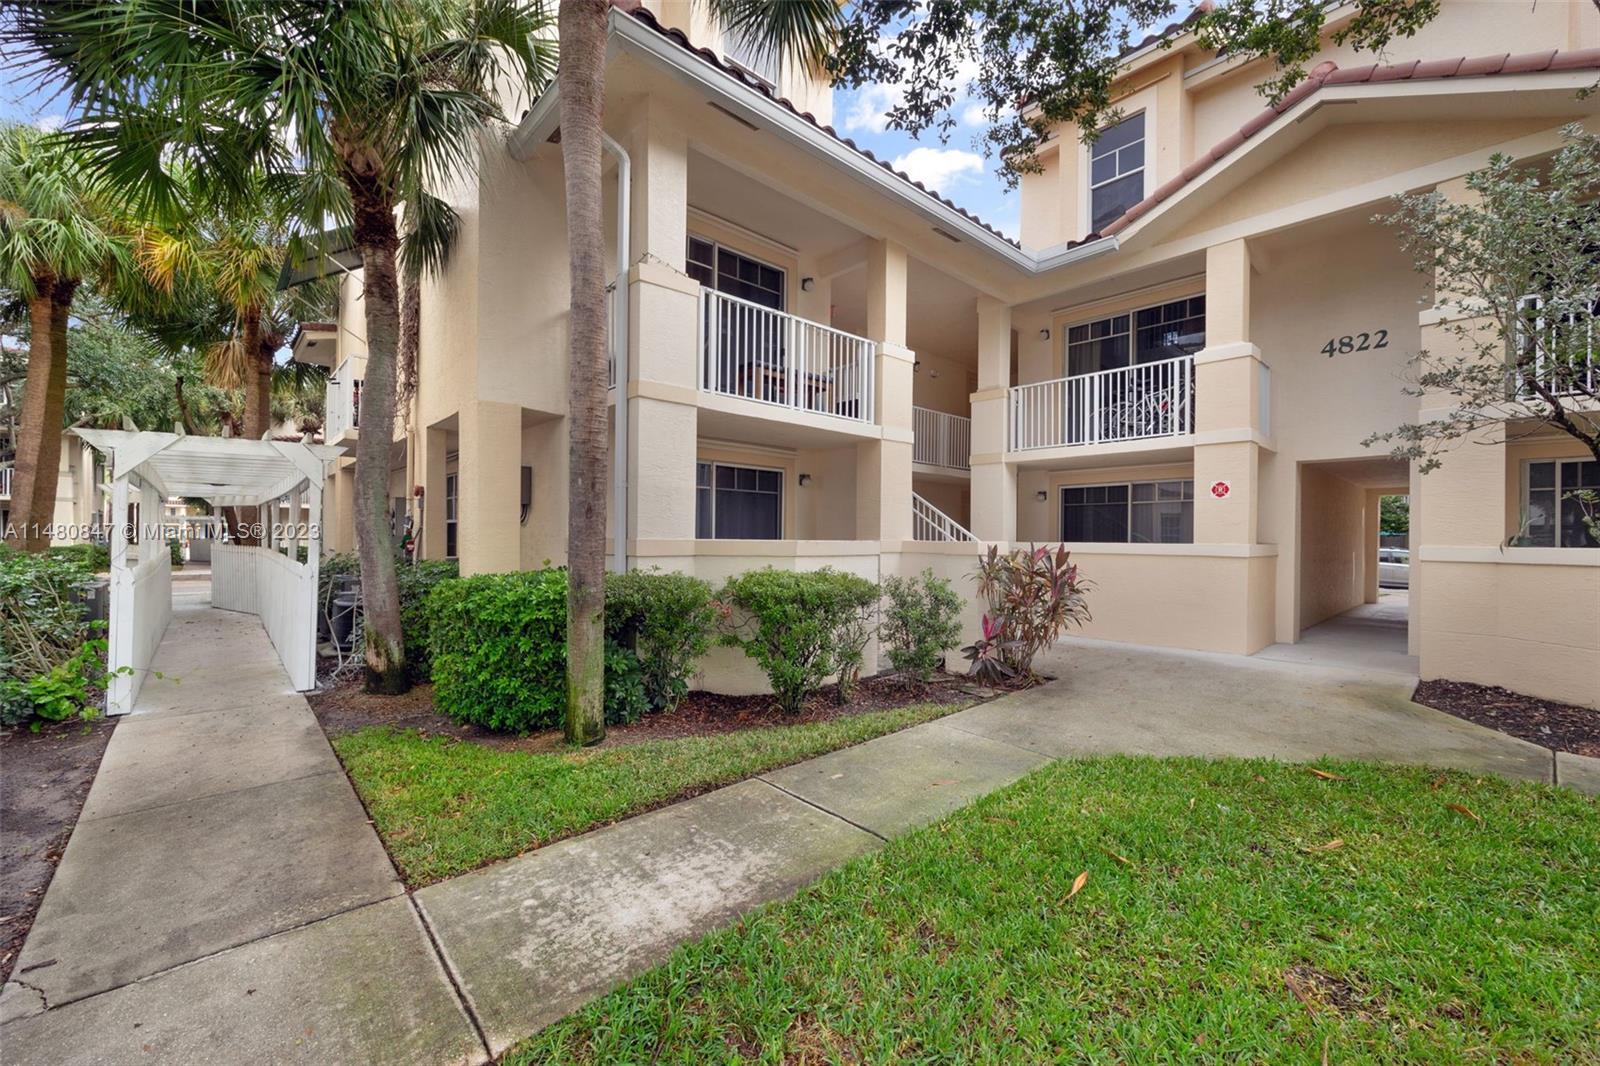 Introducing 4822 Chancellor Drive in Jupiter, Florida! This charming 2 bedroom, 2 bath home is locat